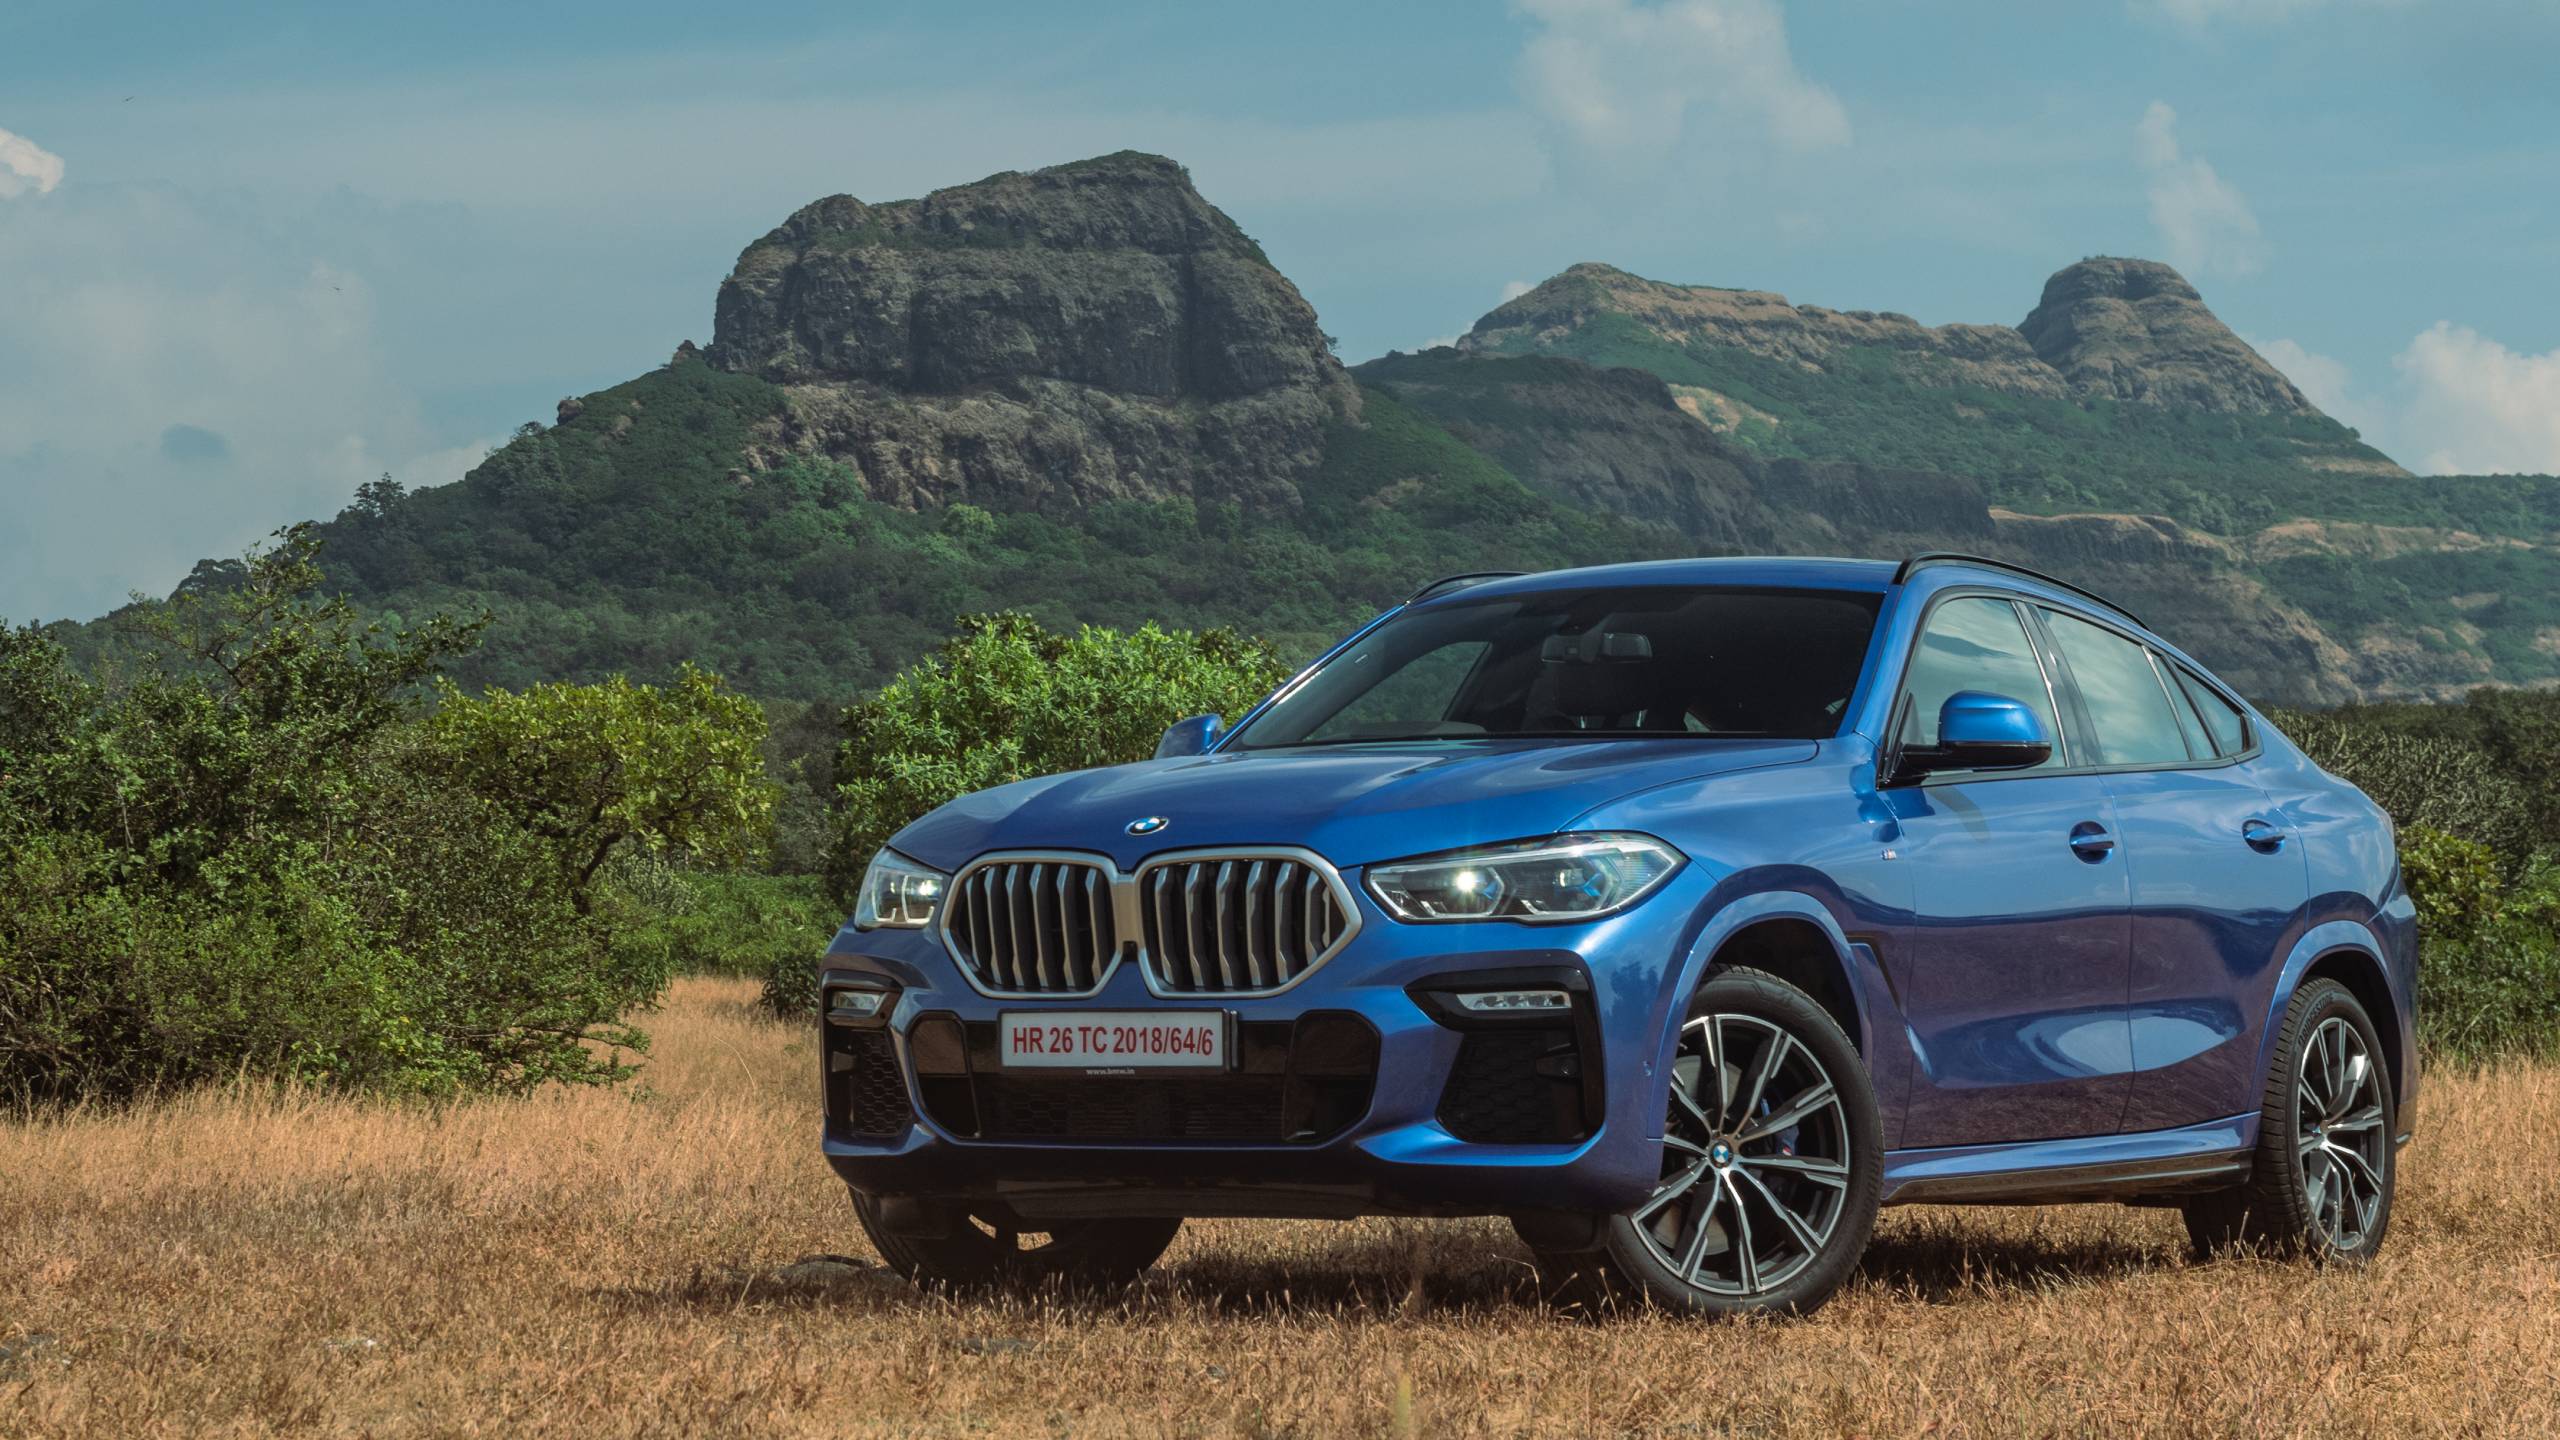 BMW X6 2020 is an Innovative Breed of Car